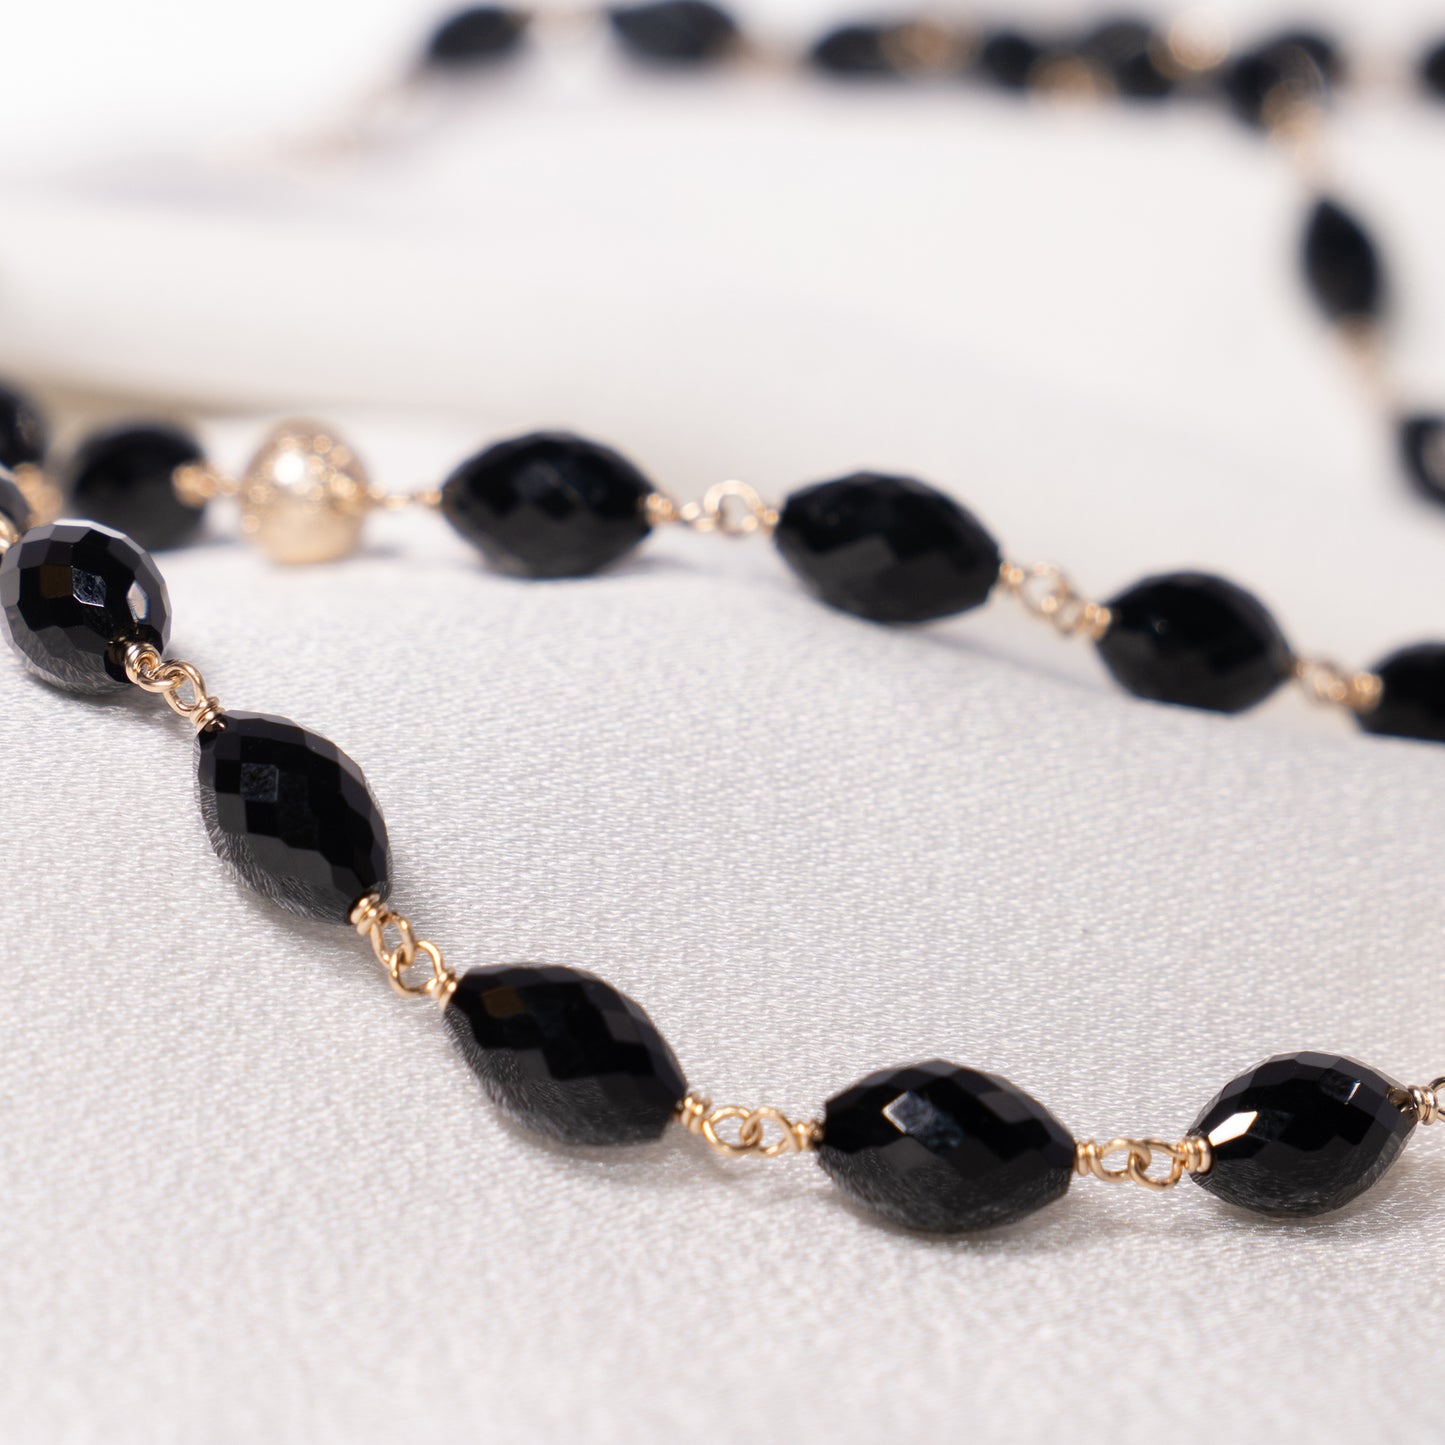 14k Faceted/Oval Black Onyx Layered 2 Row Necklace 18 to 20"